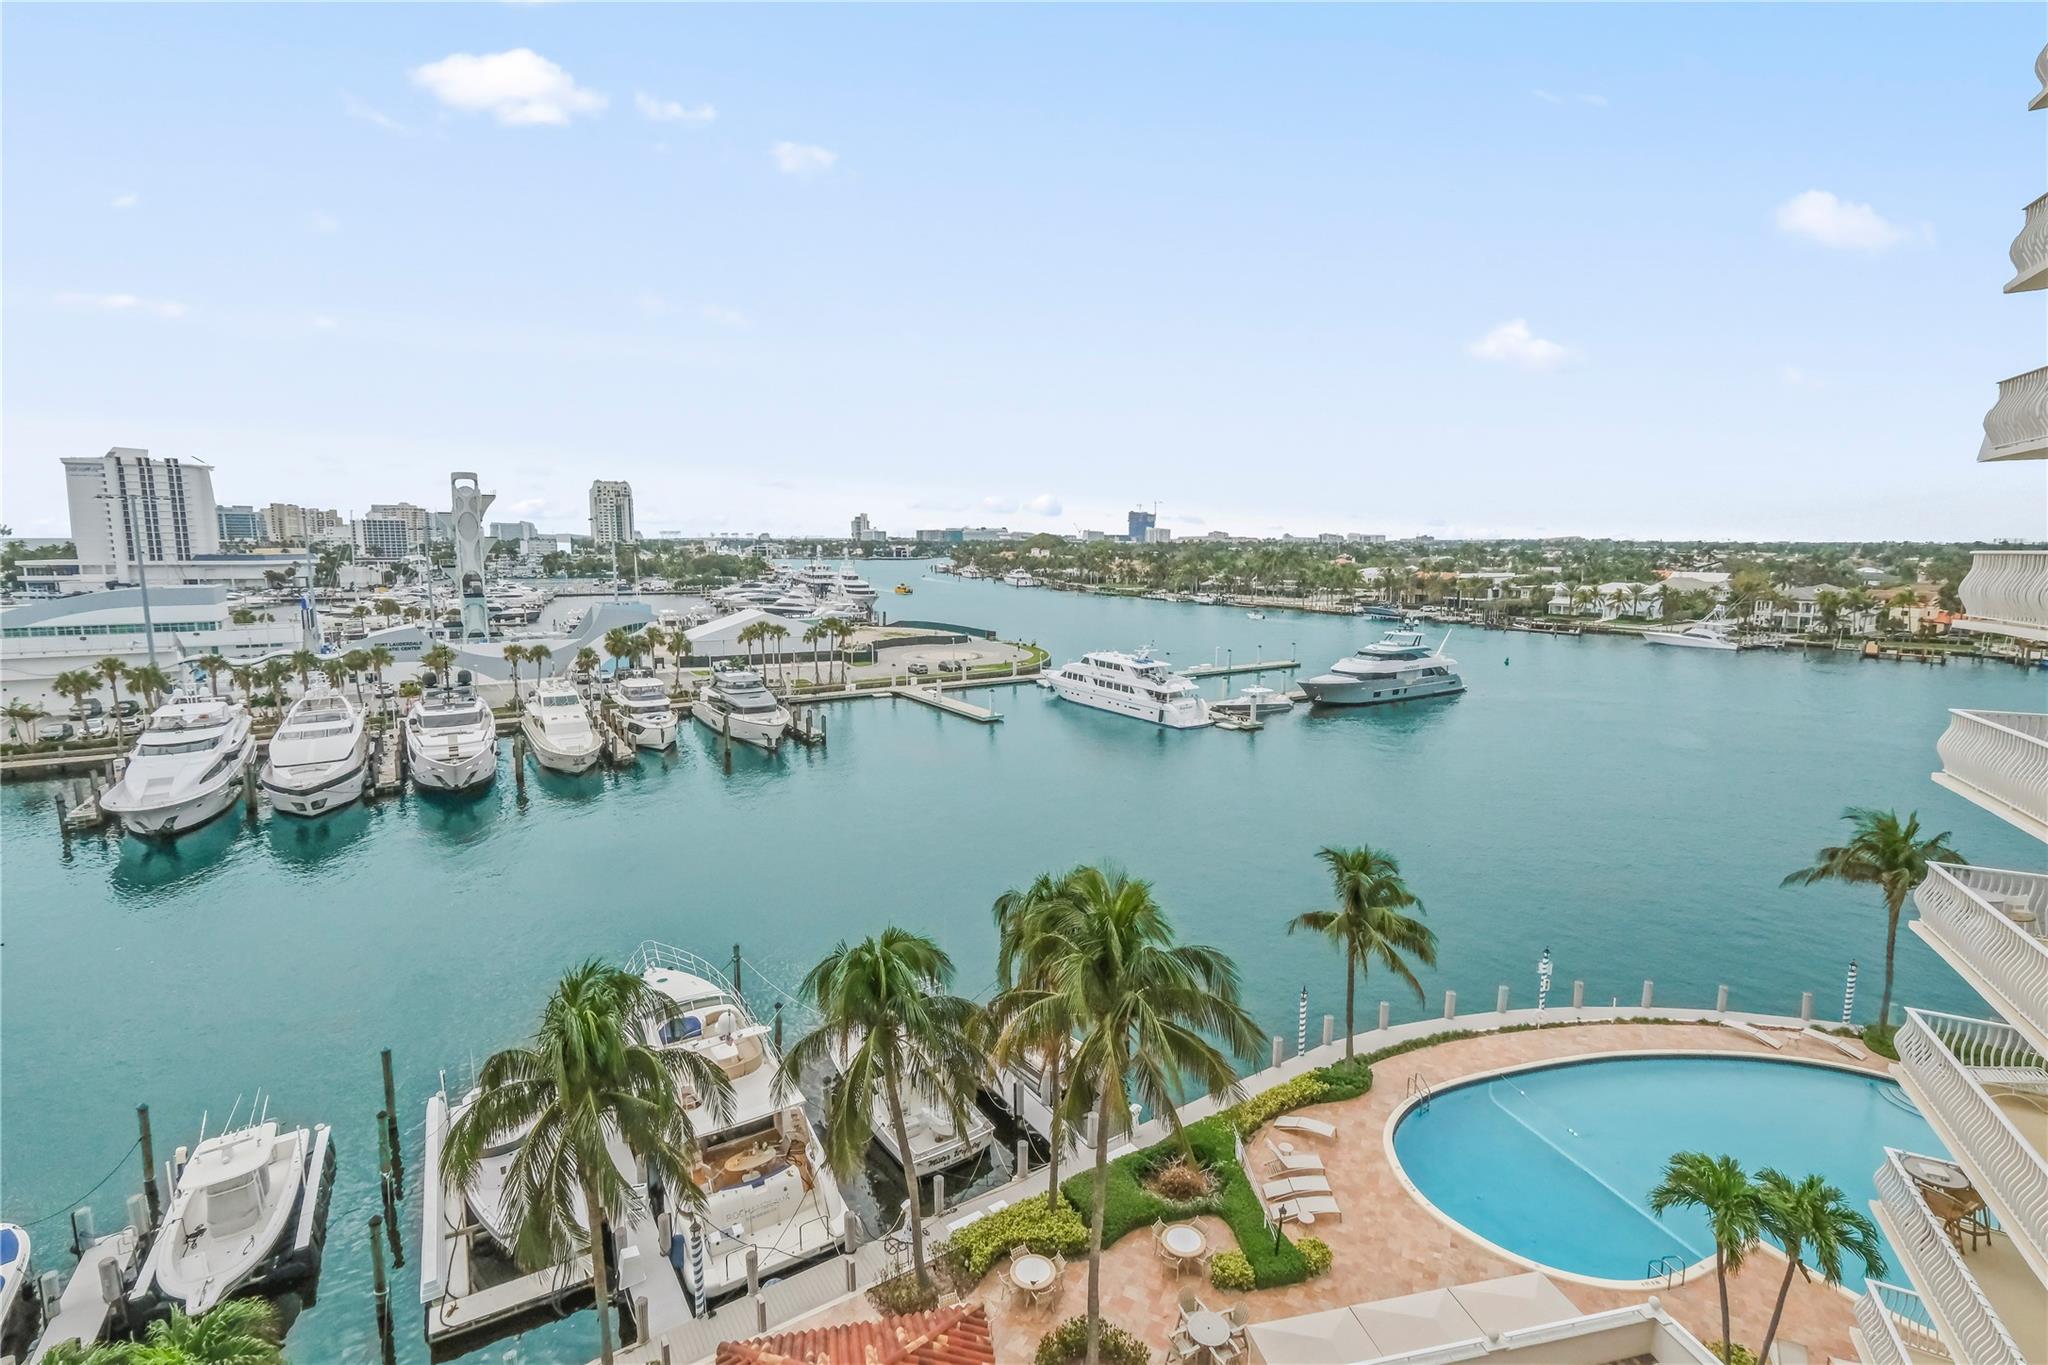 Property featured in Waterfront Condos in - Ft. Lauderdale under 1M #3